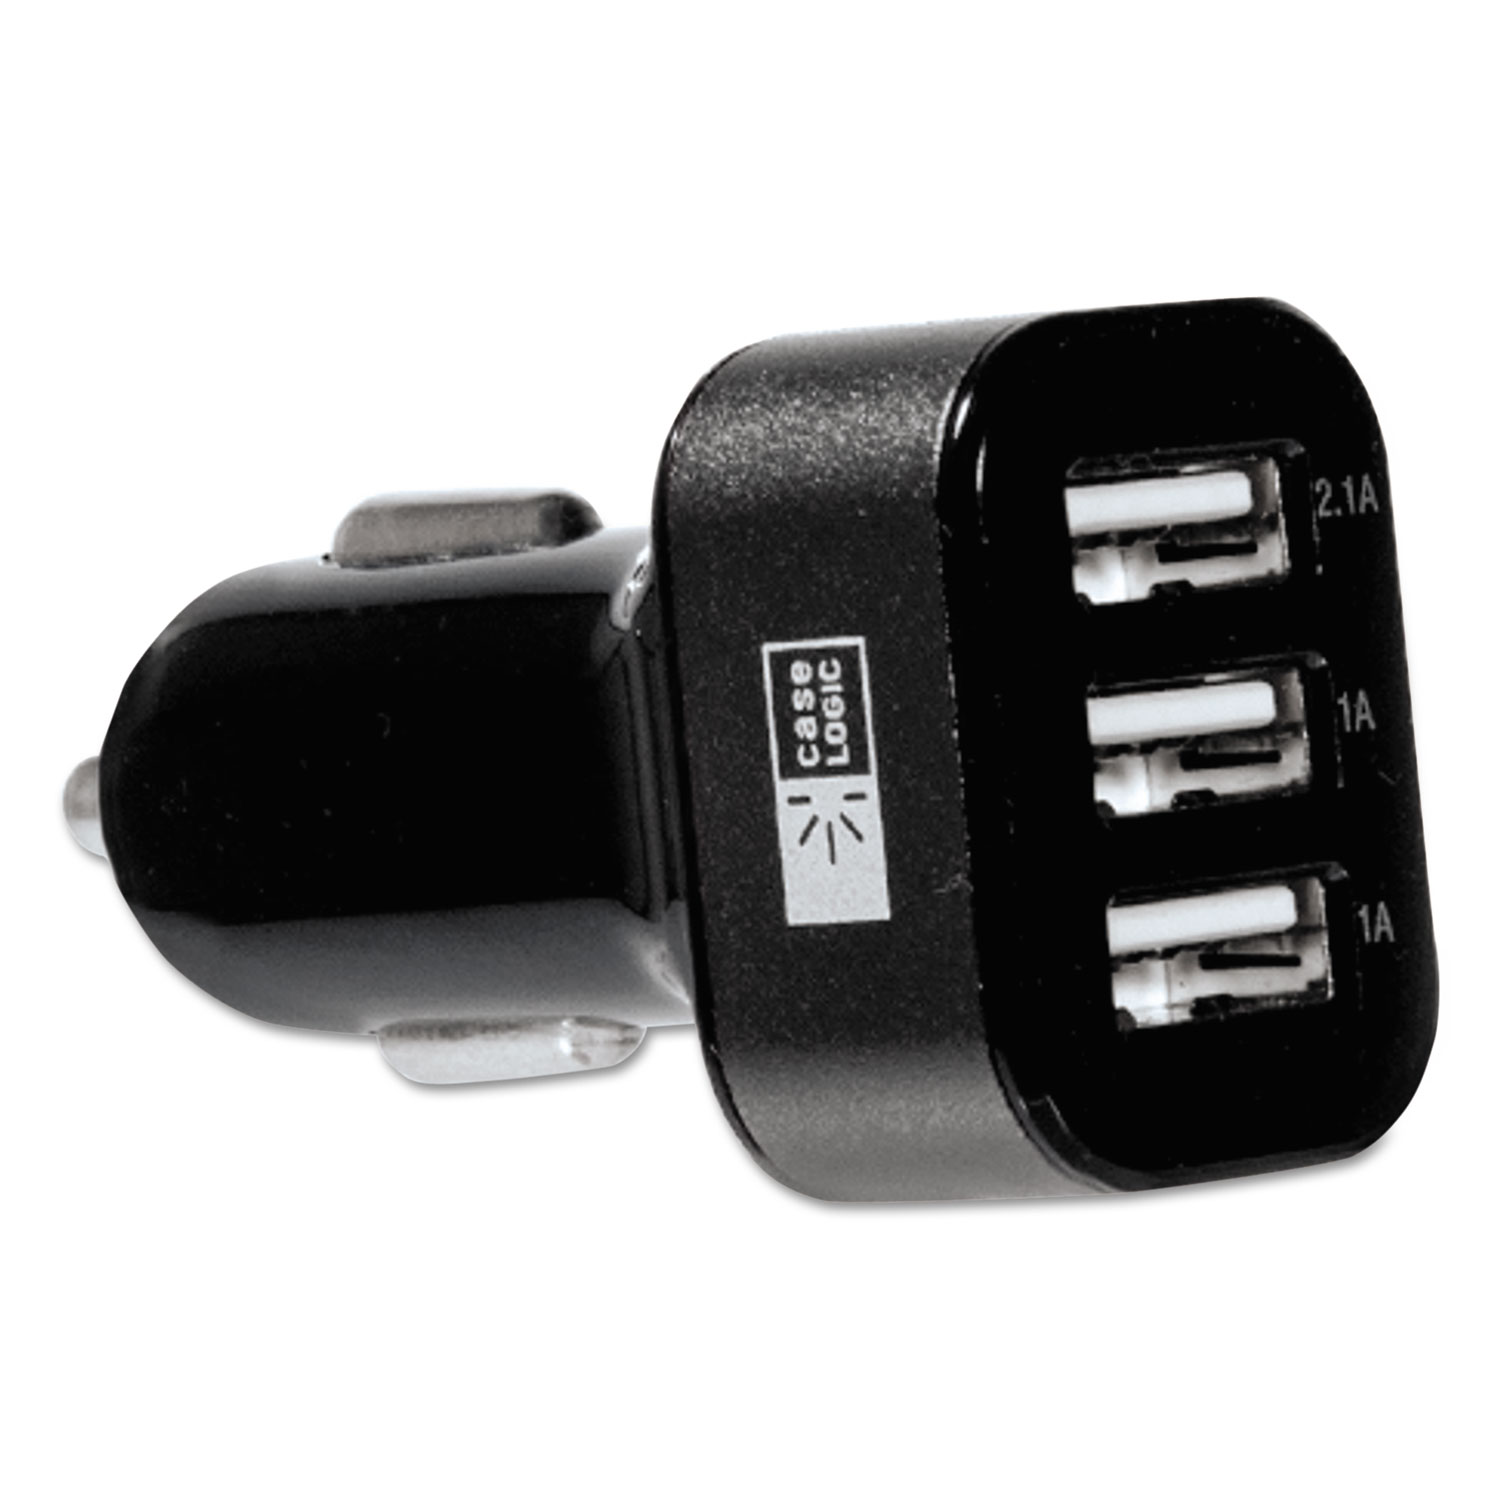 Car Charger, 3 USB Ports